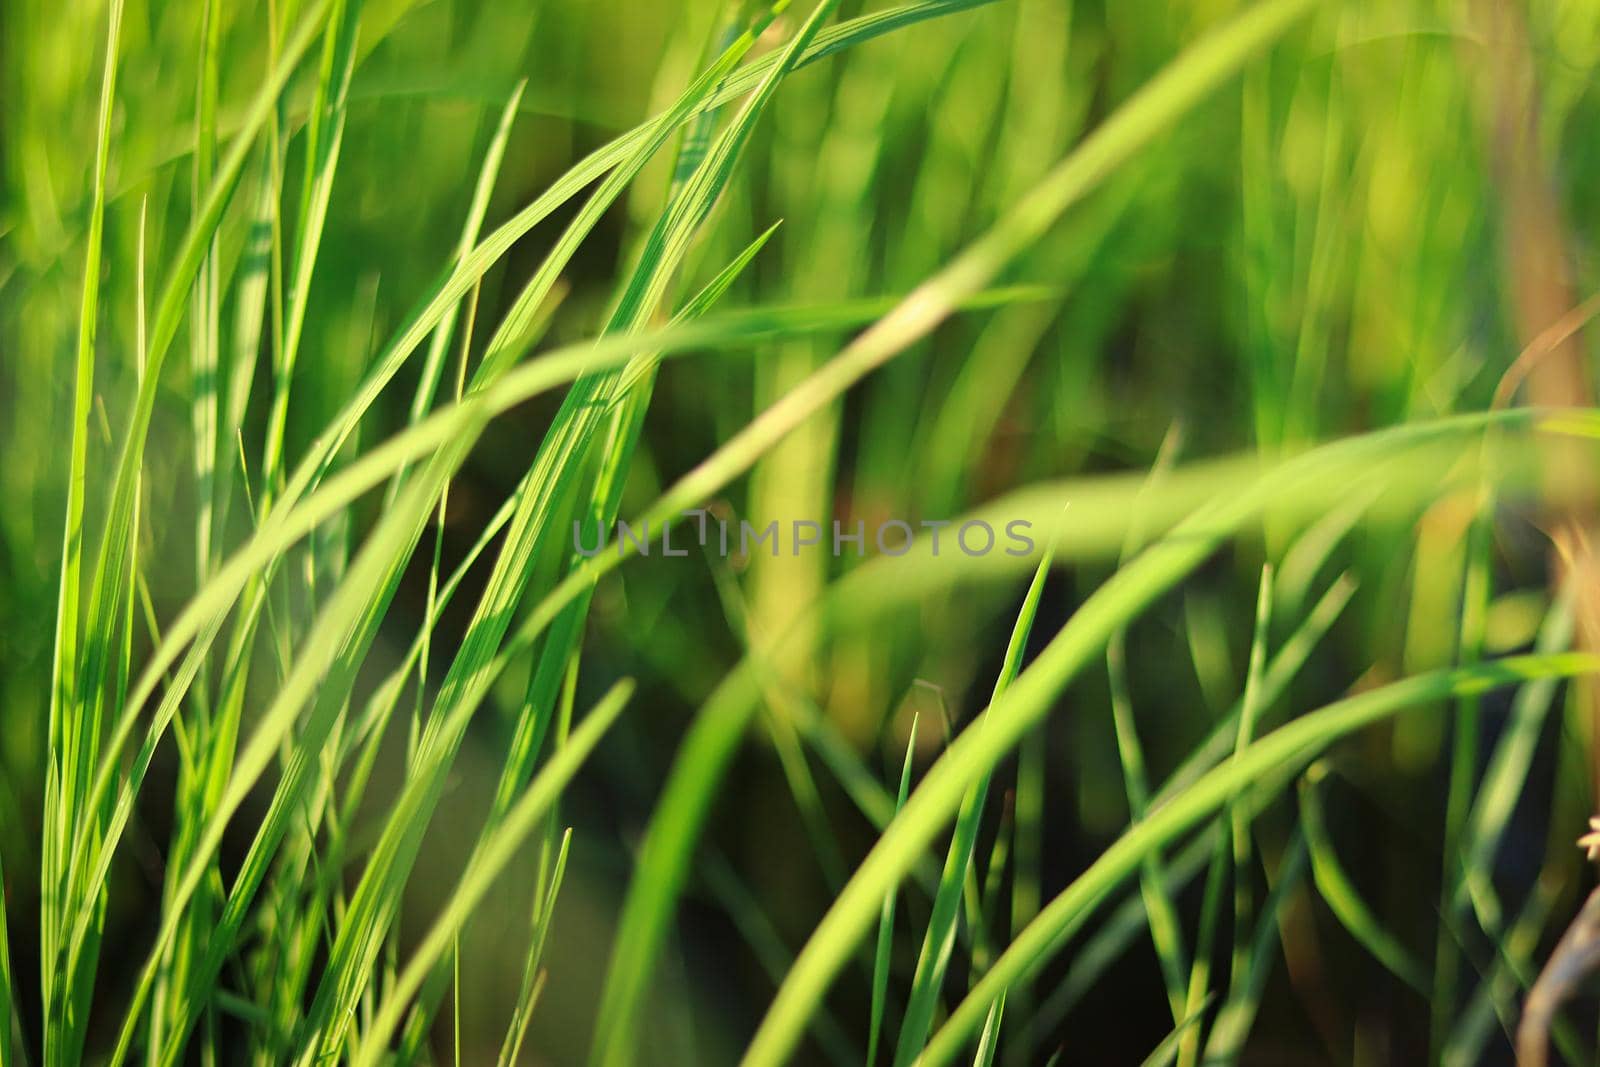 Close up of green blades of grass swaying in the breeze